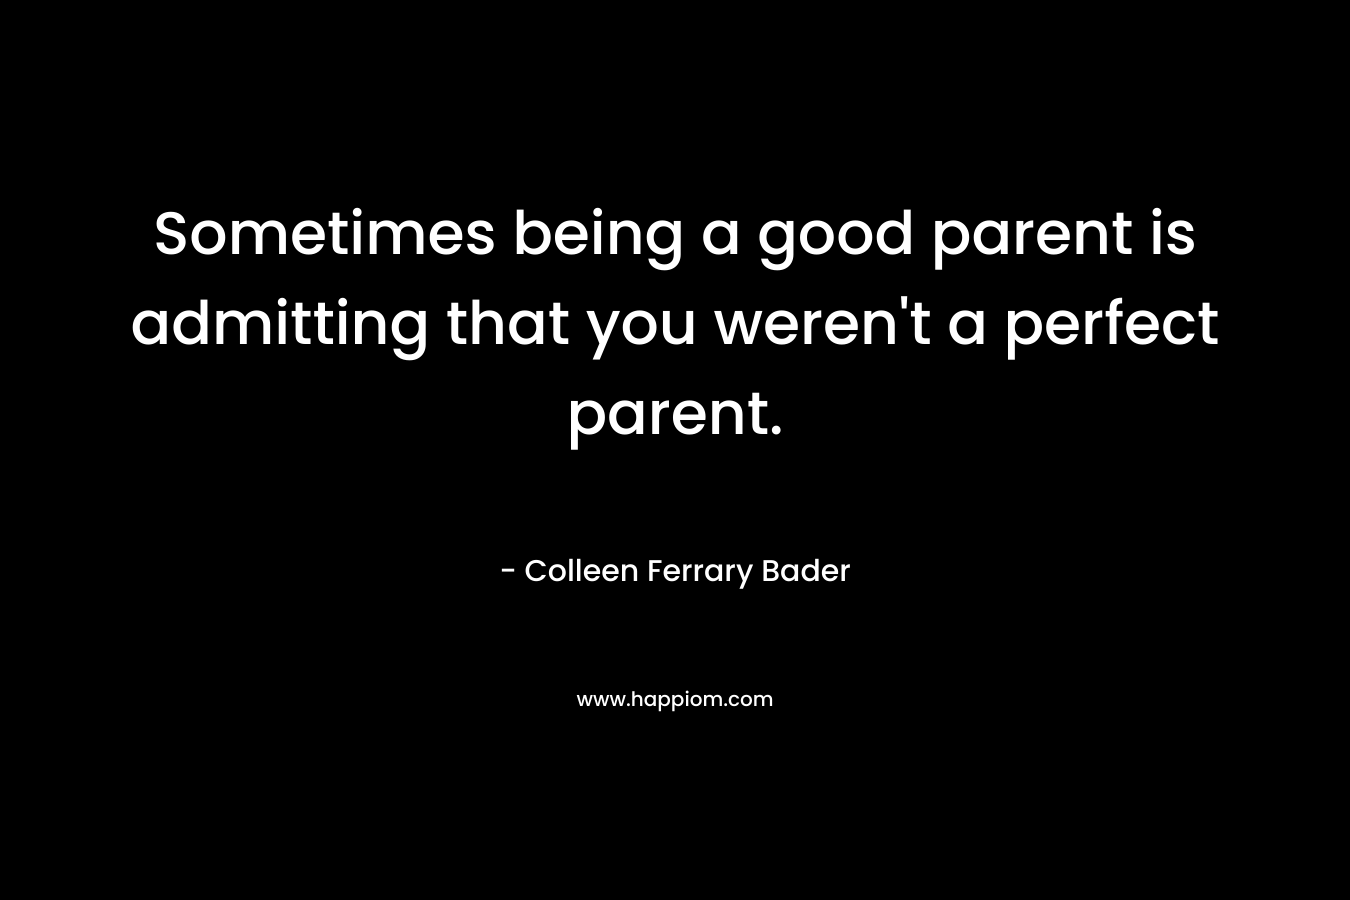 Sometimes being a good parent is admitting that you weren’t a perfect parent. – Colleen Ferrary Bader